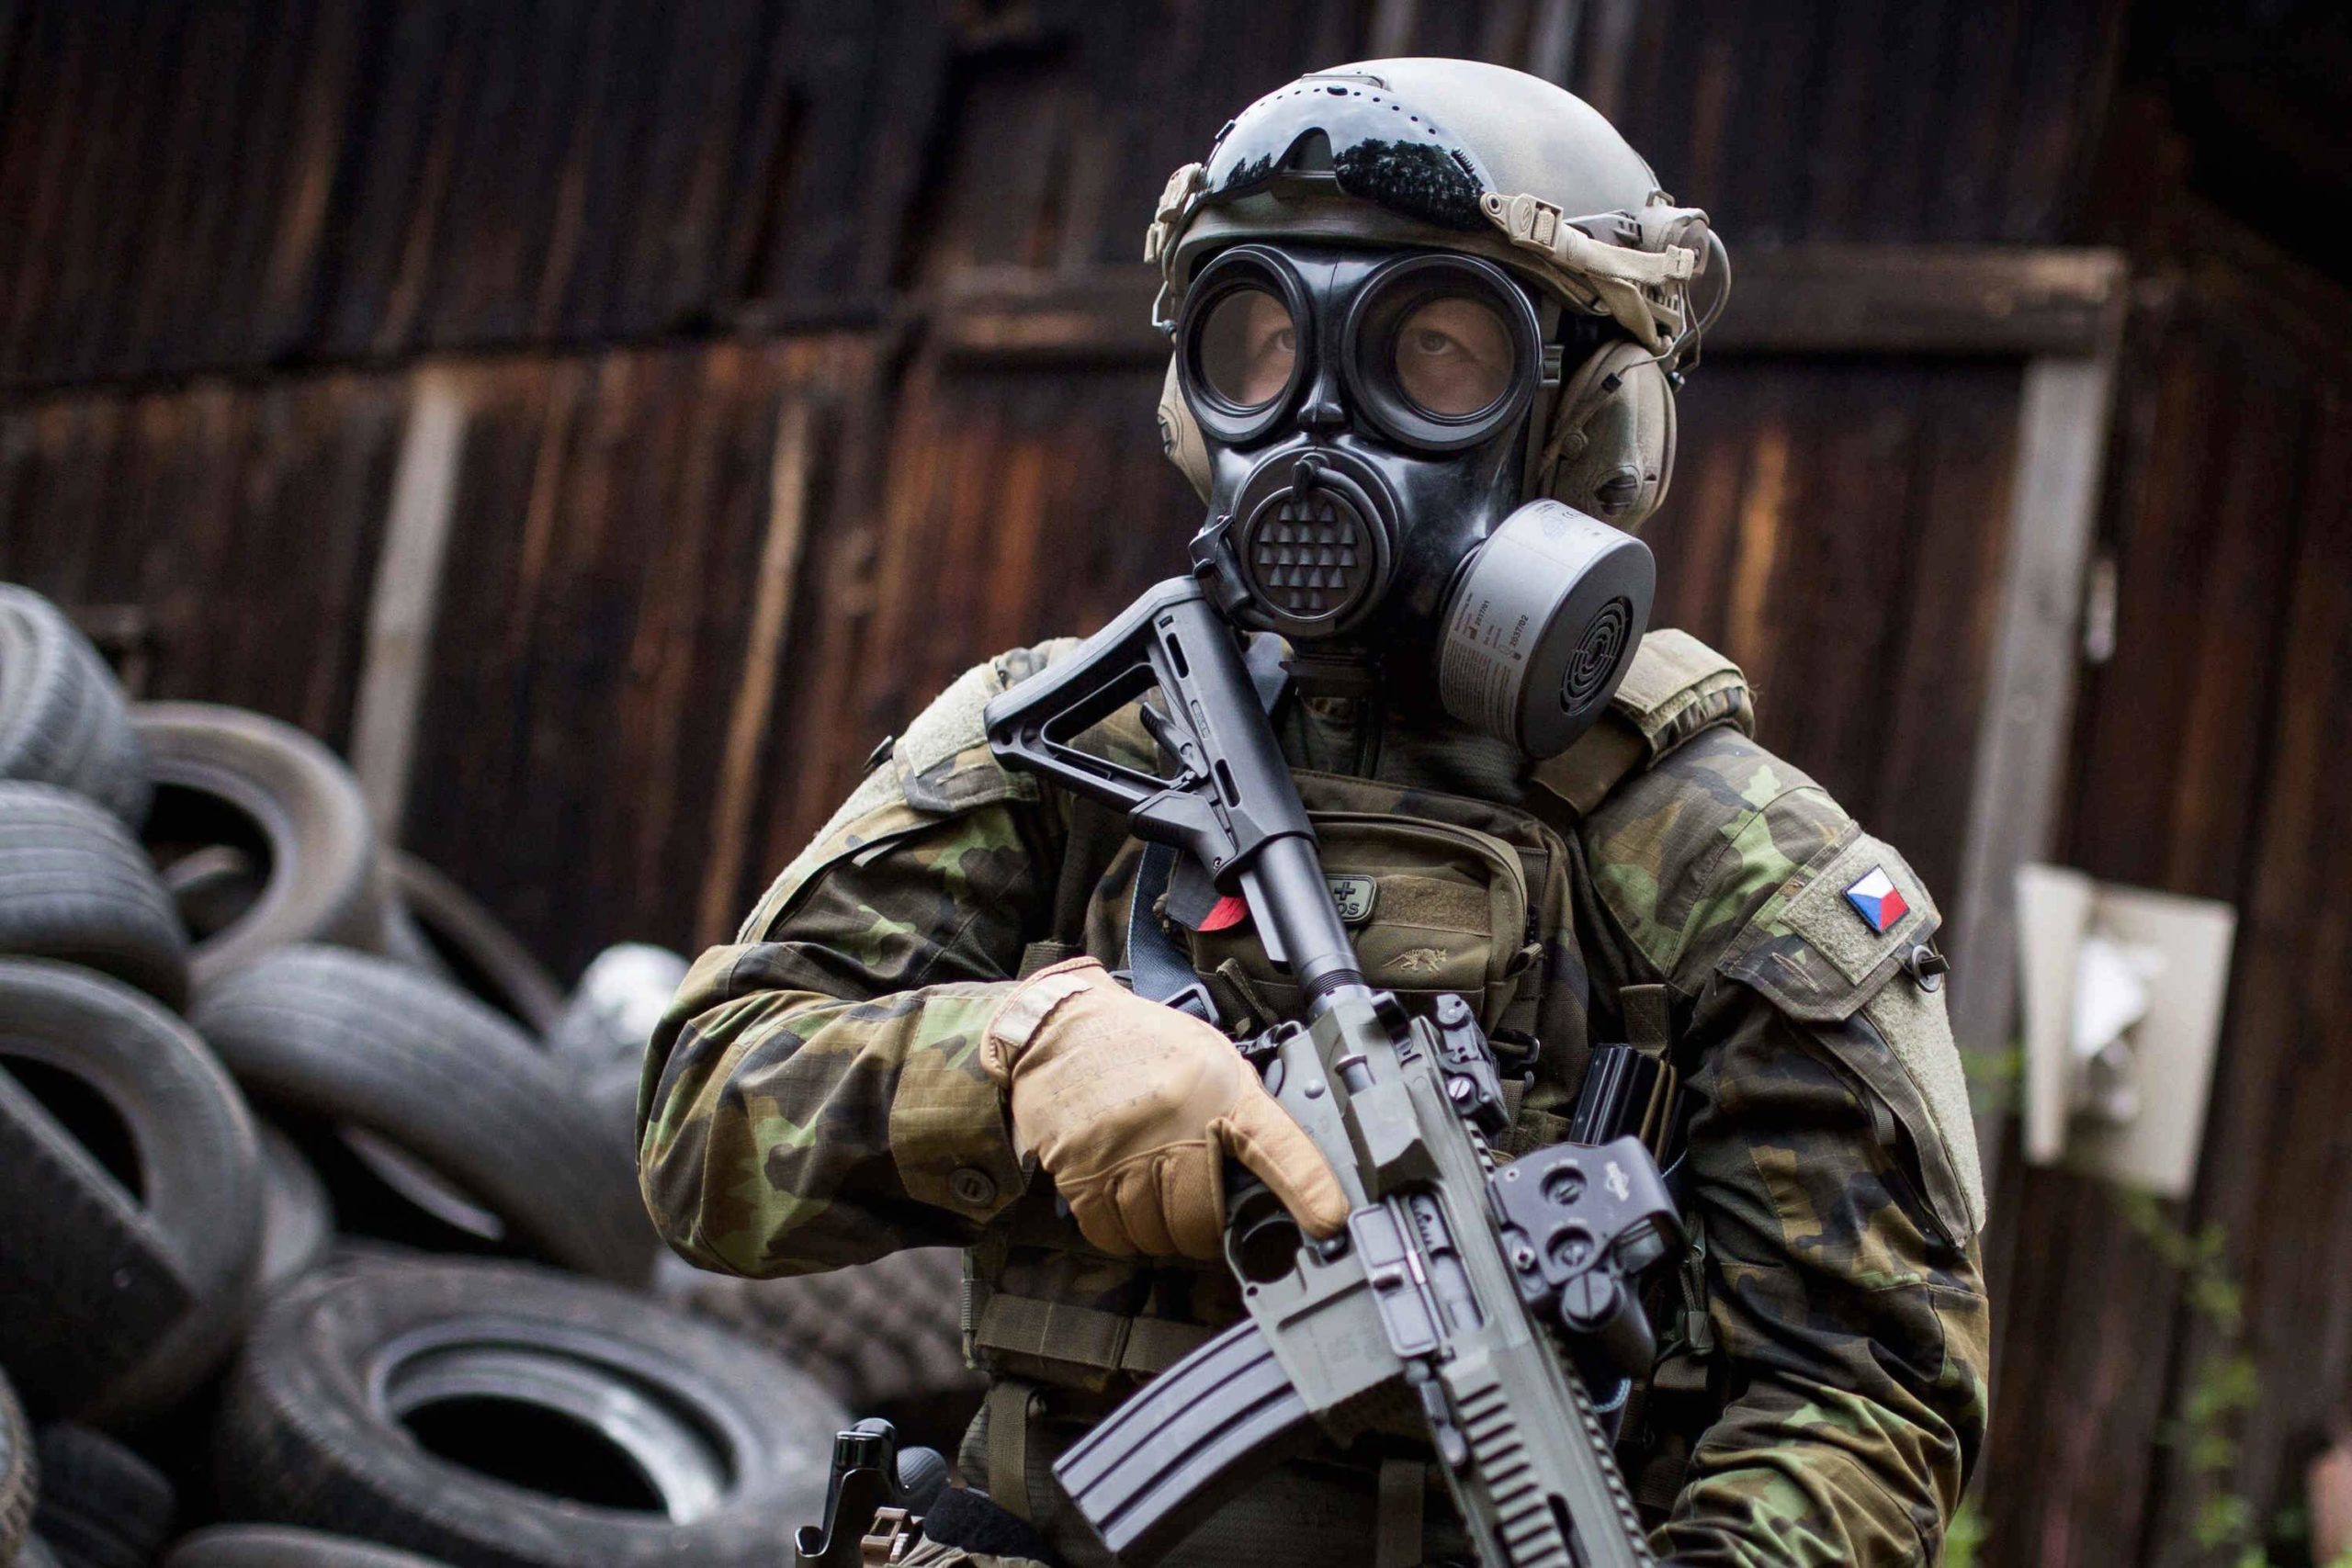 The MIRA Safety CM-7M Military Gas Mask